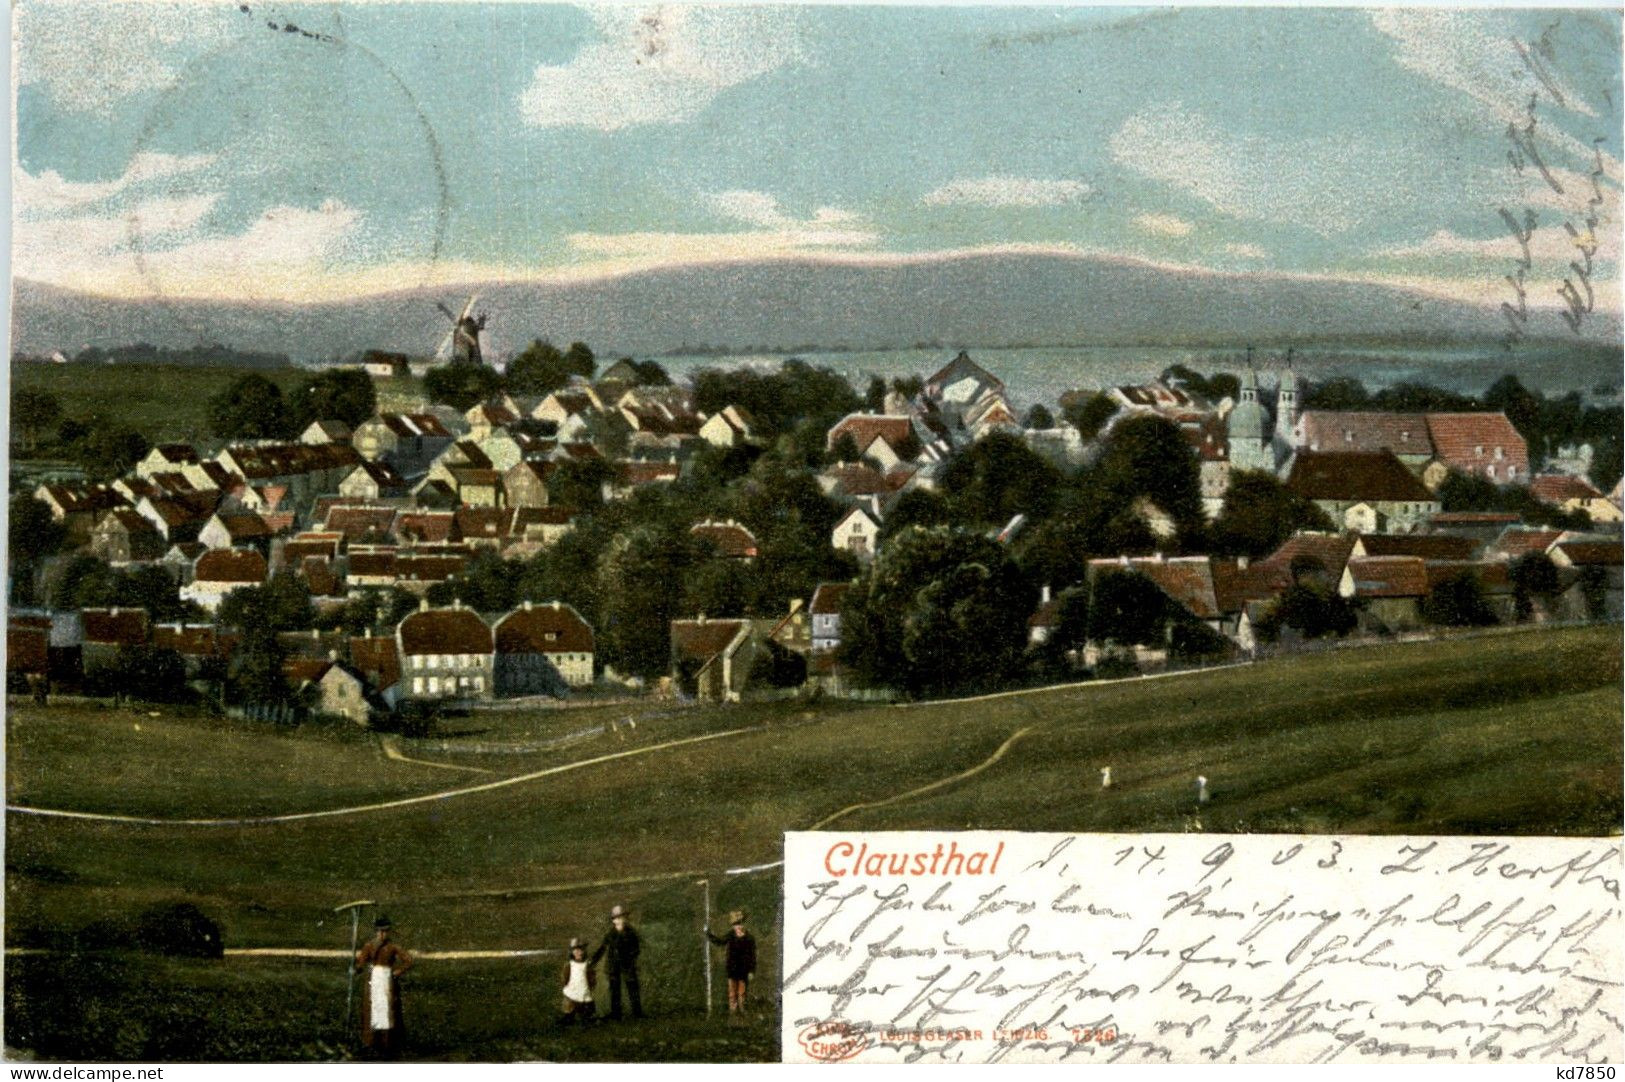 Clausthal - Clausthal-Zellerfeld